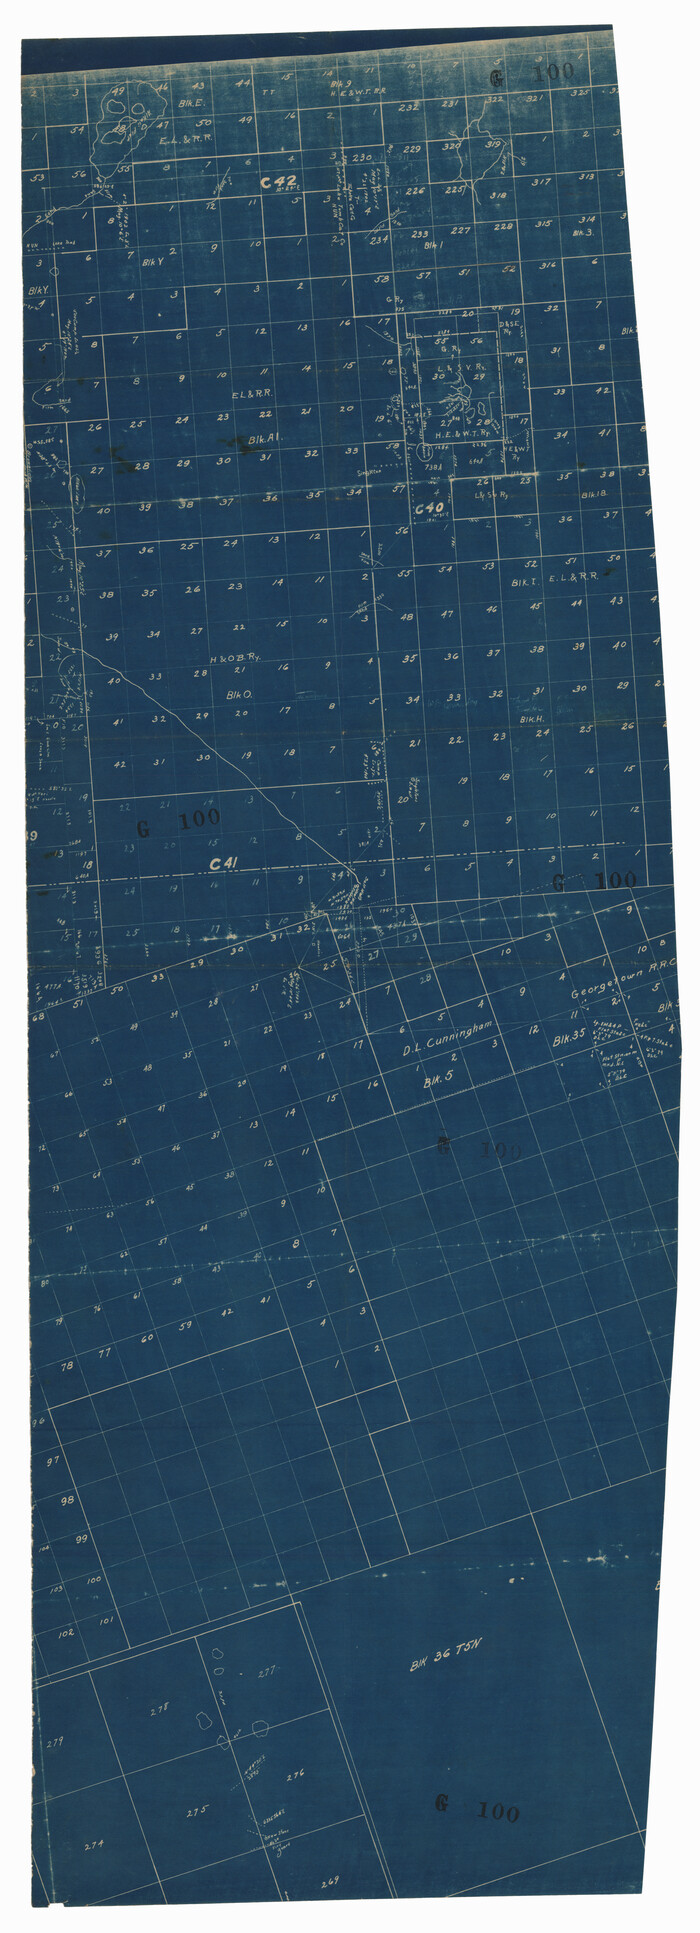 92641, [Blocks C41, C42, A1, and vicinity], Twichell Survey Records